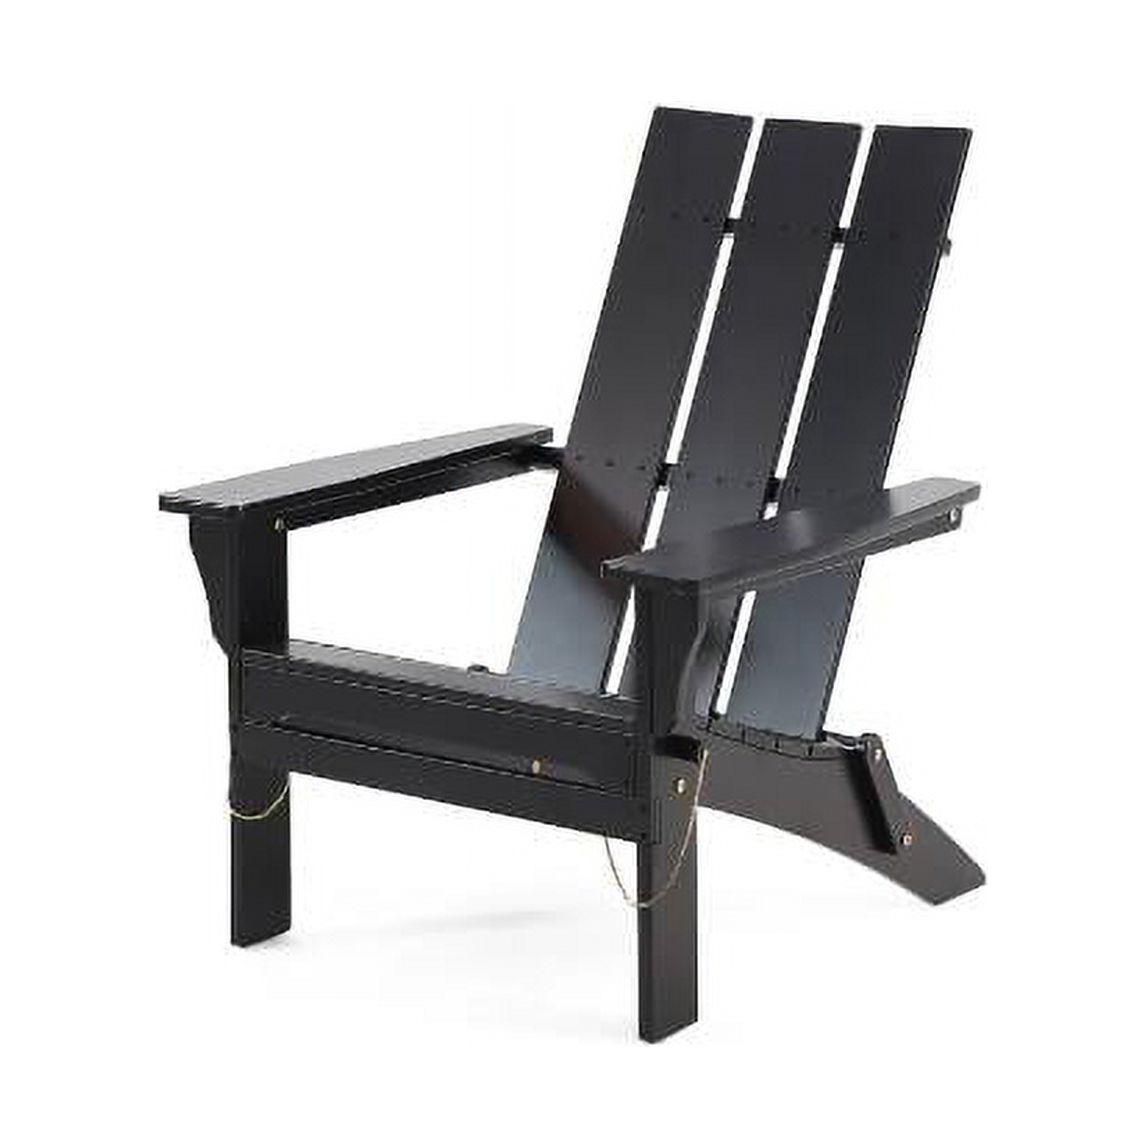 KUIKUI Outdoor Classic Pure Black Solid Wood Chair Garden Lounge Chair Foldable - image 5 of 7